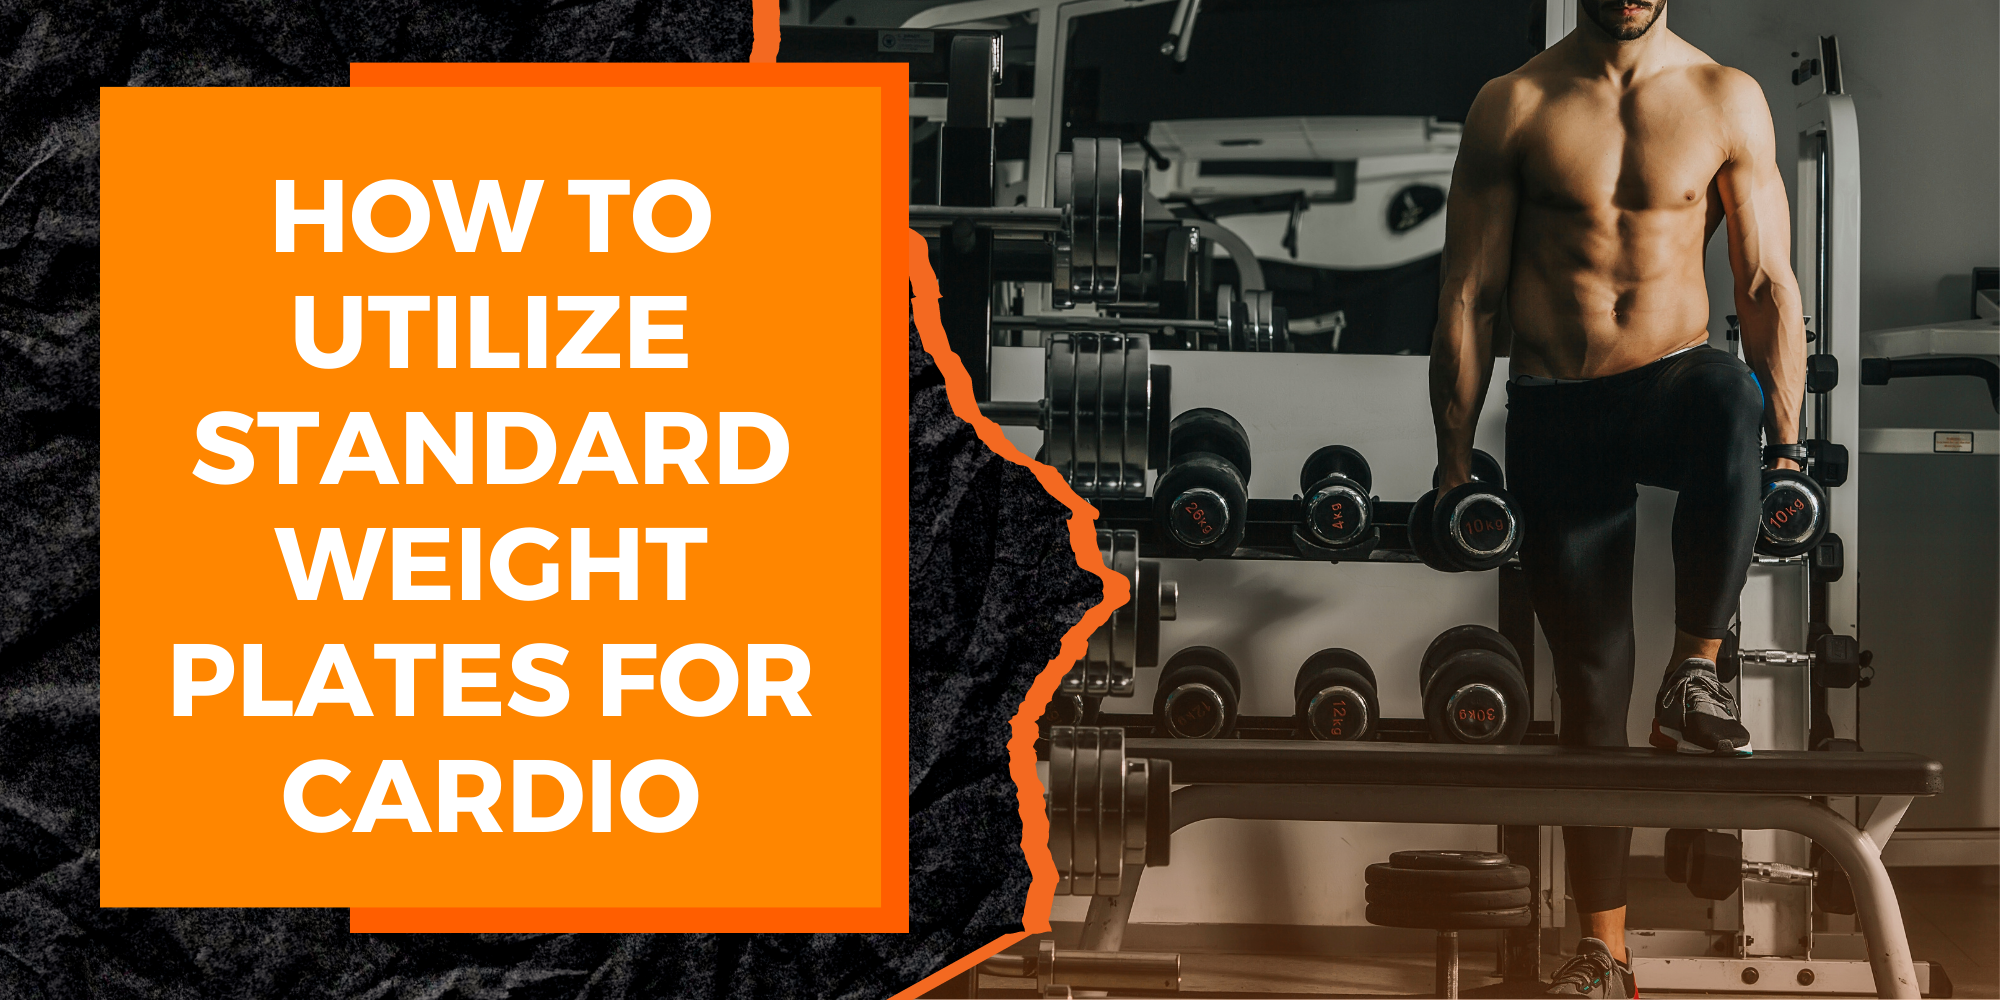 How to Utilize Standard Weight Plates for Cardio